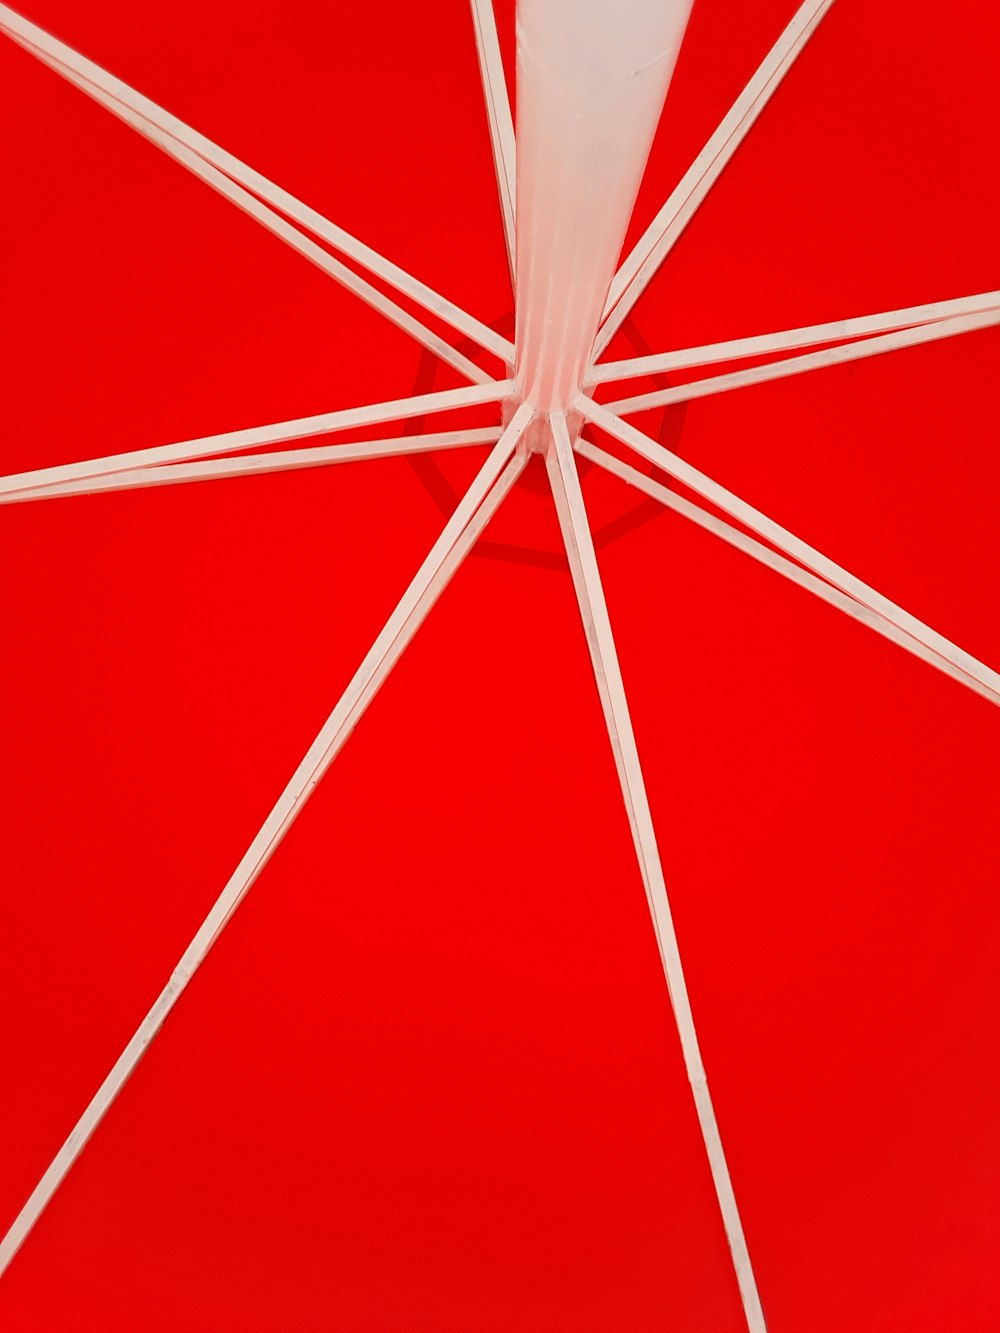 a close up of a red and white umbrella